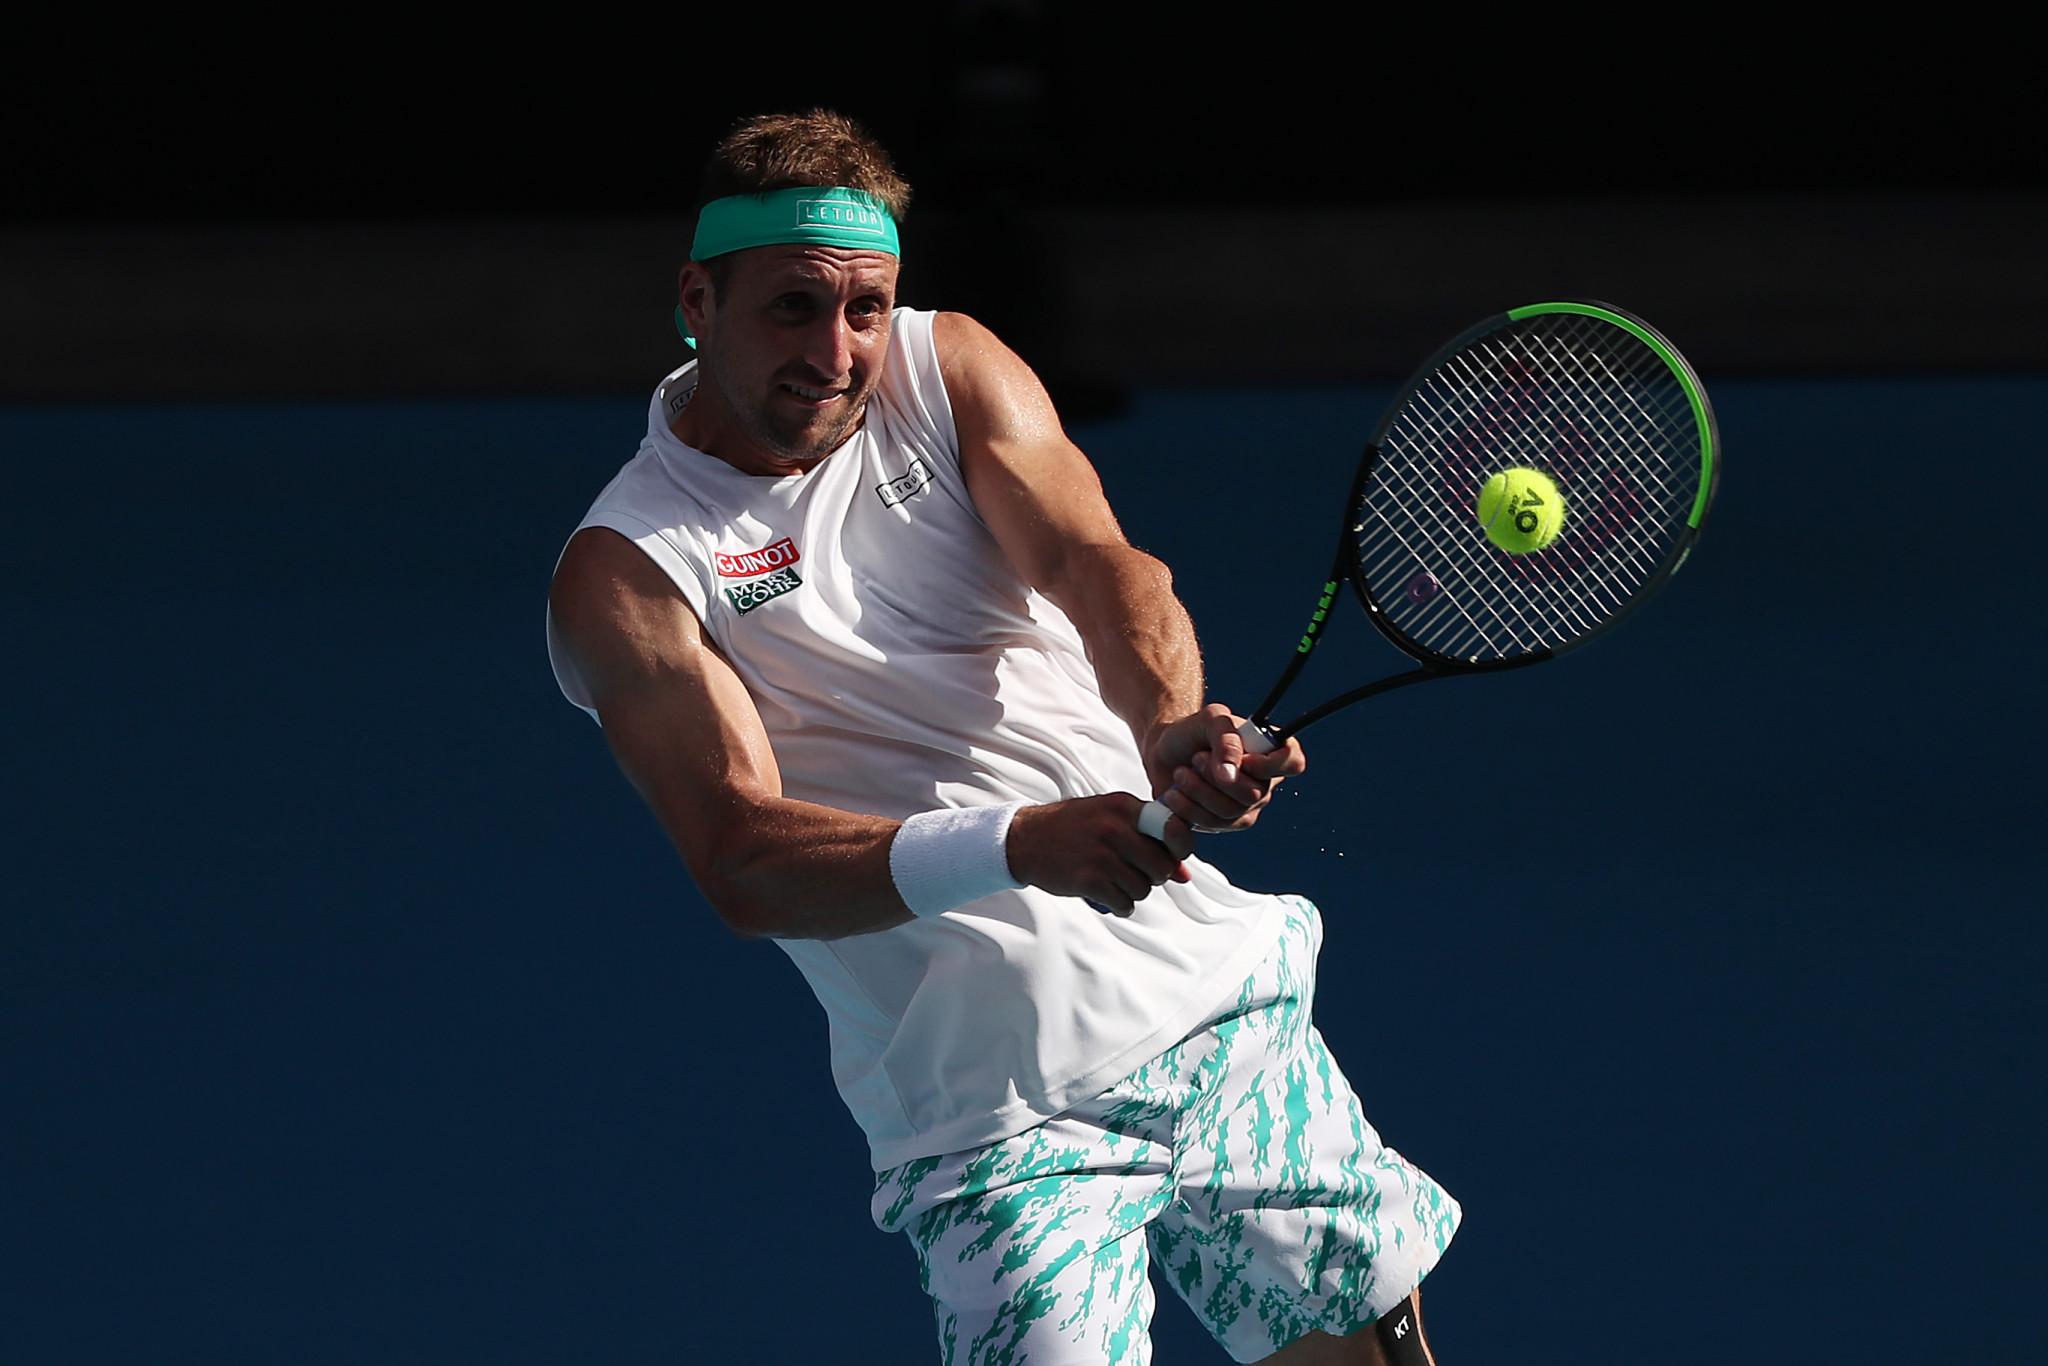  Tennys Sandgren plays a shot in his defeat to Federer  ©Getty Images